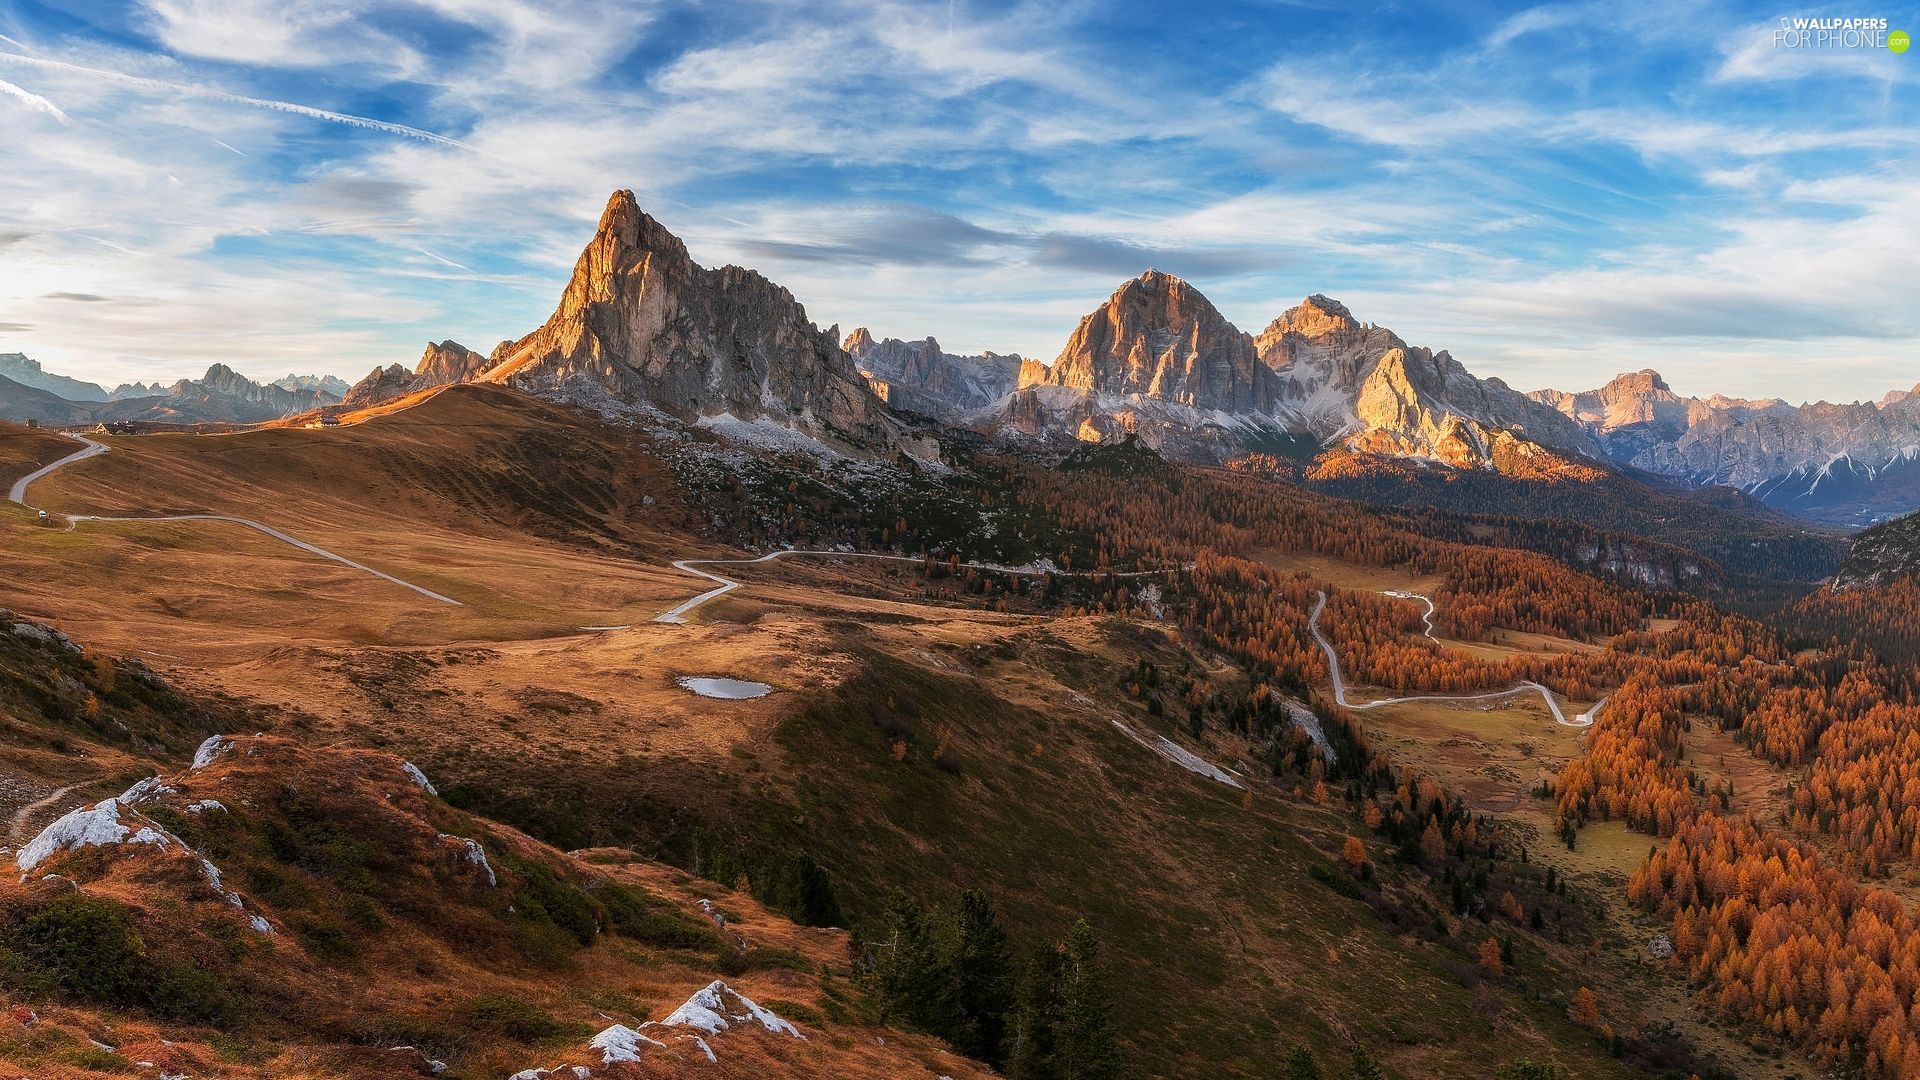 Province of Belluno, Italy, pass, Mountains, Way, autumn, viewes, Dolomites, Mountains, trees, Passo di Giau phone wallpaper: 1920x1080